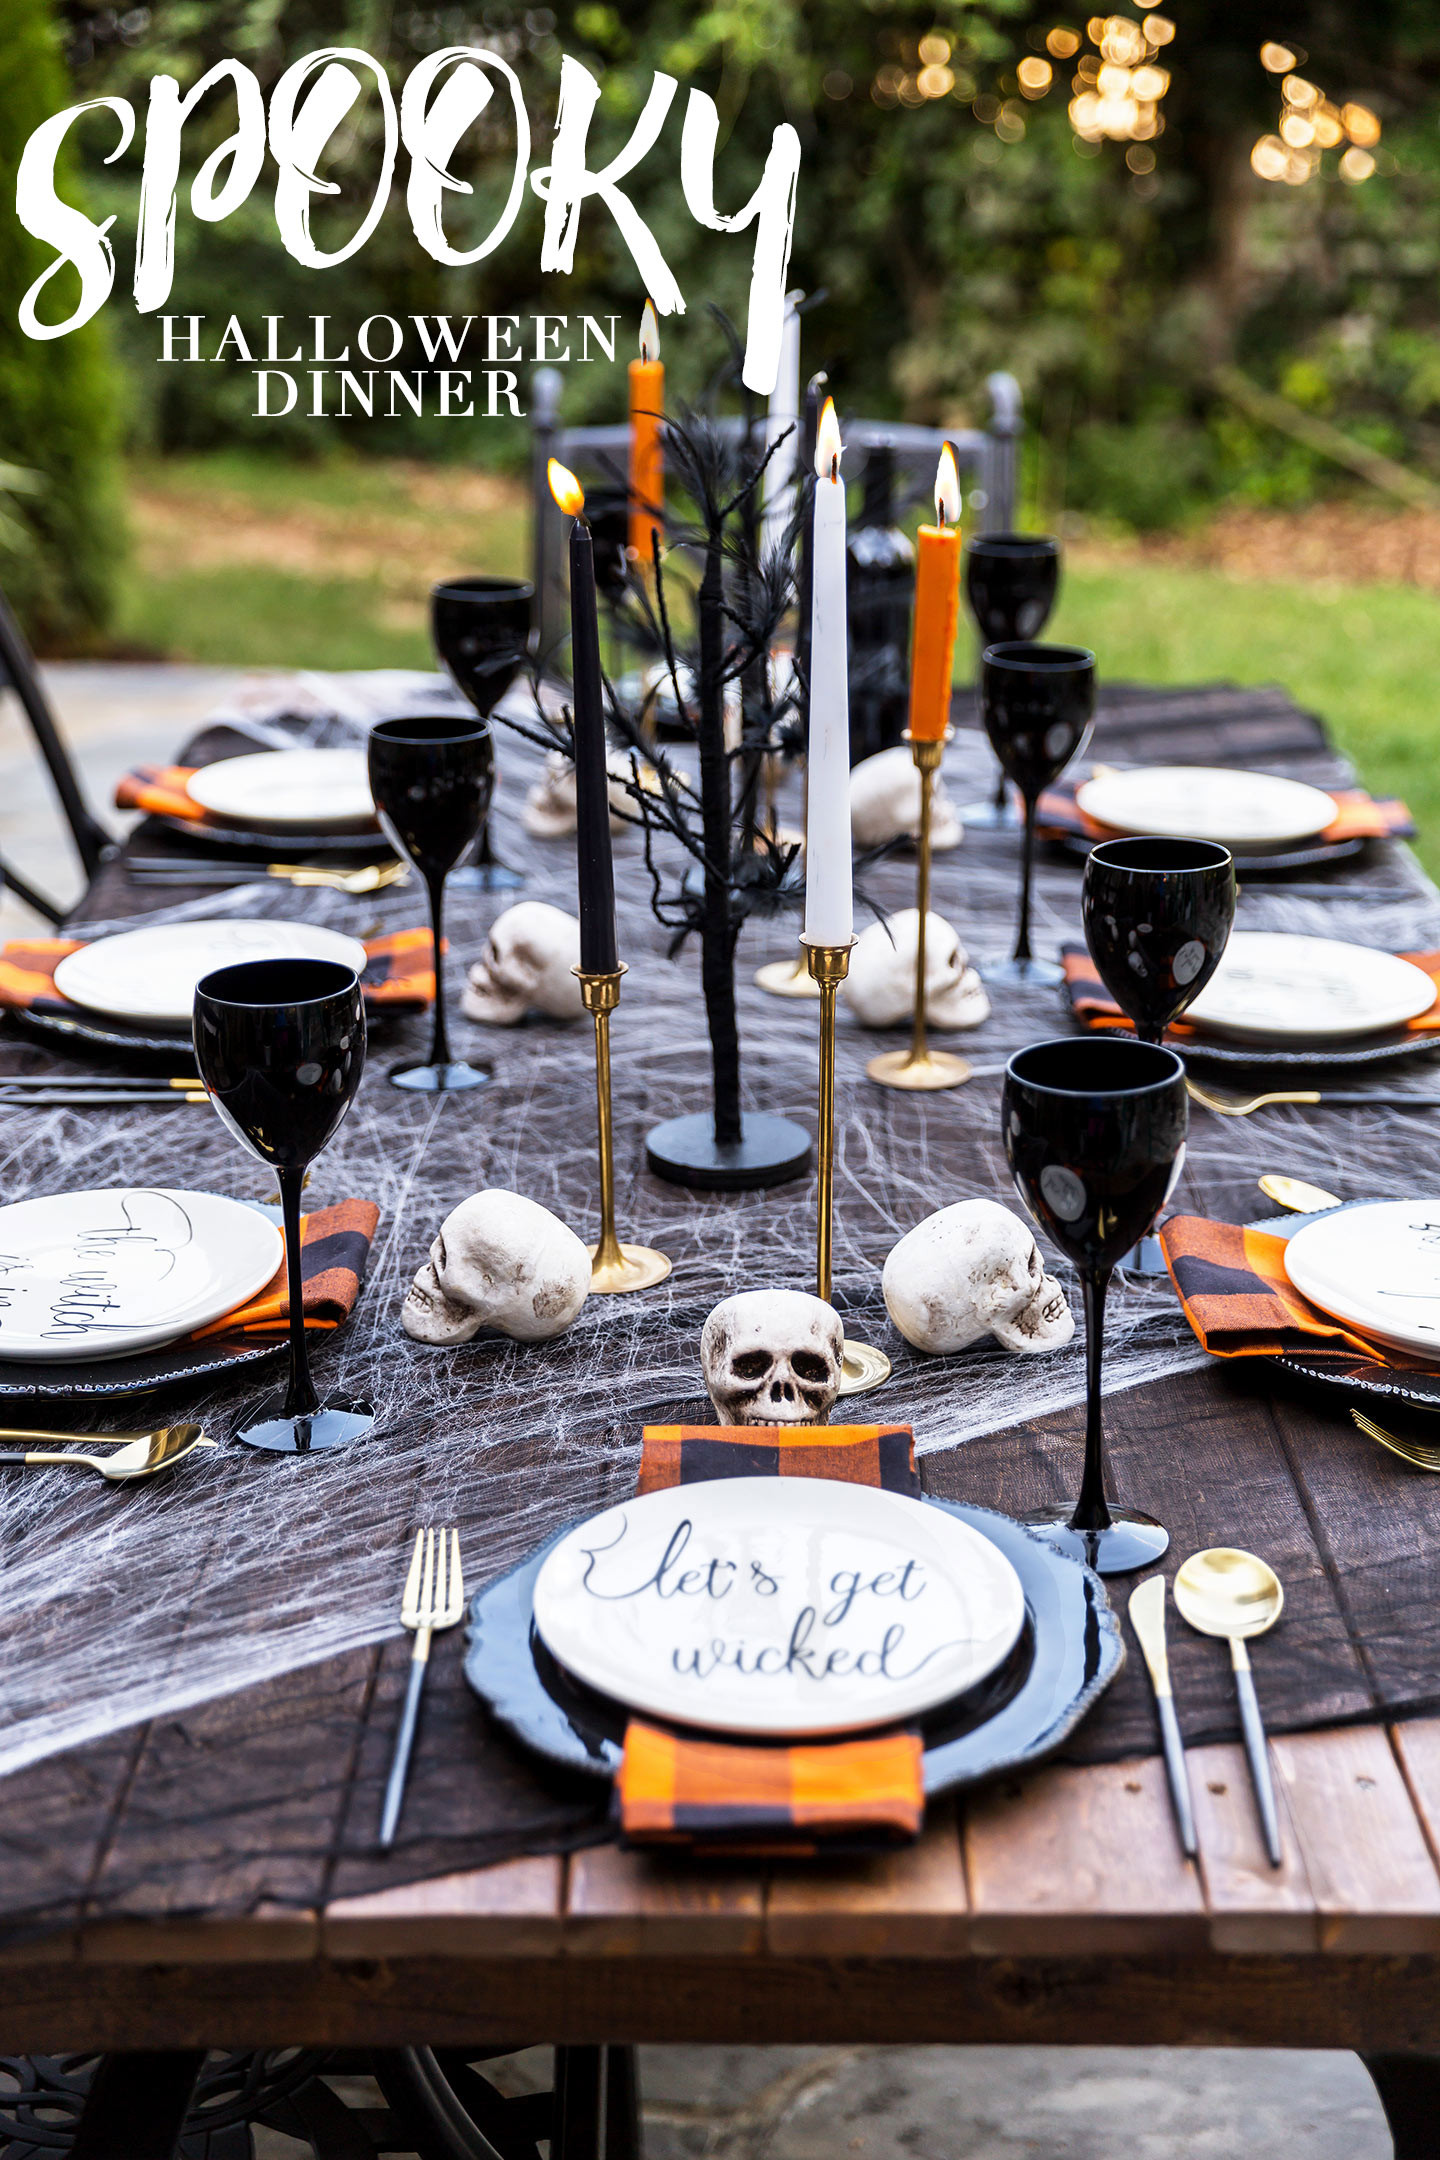 Halloween Party Menu Ideas For Adults
 Adult Halloween Party Decorations & Halloween Menu Ideas